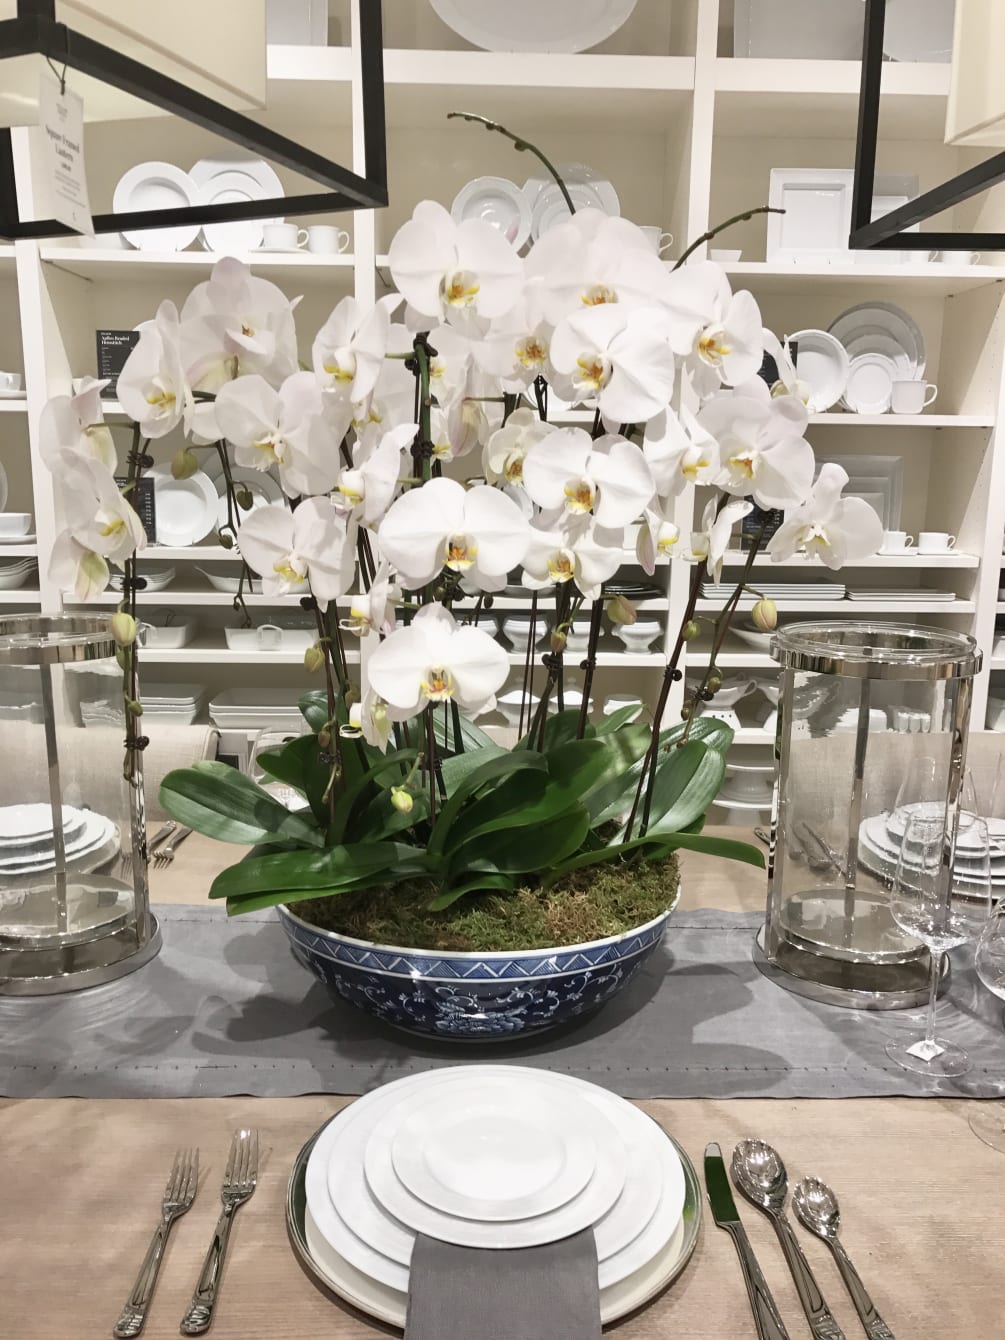 This is an amazing arrangement of white orchids in a beautiful vase.